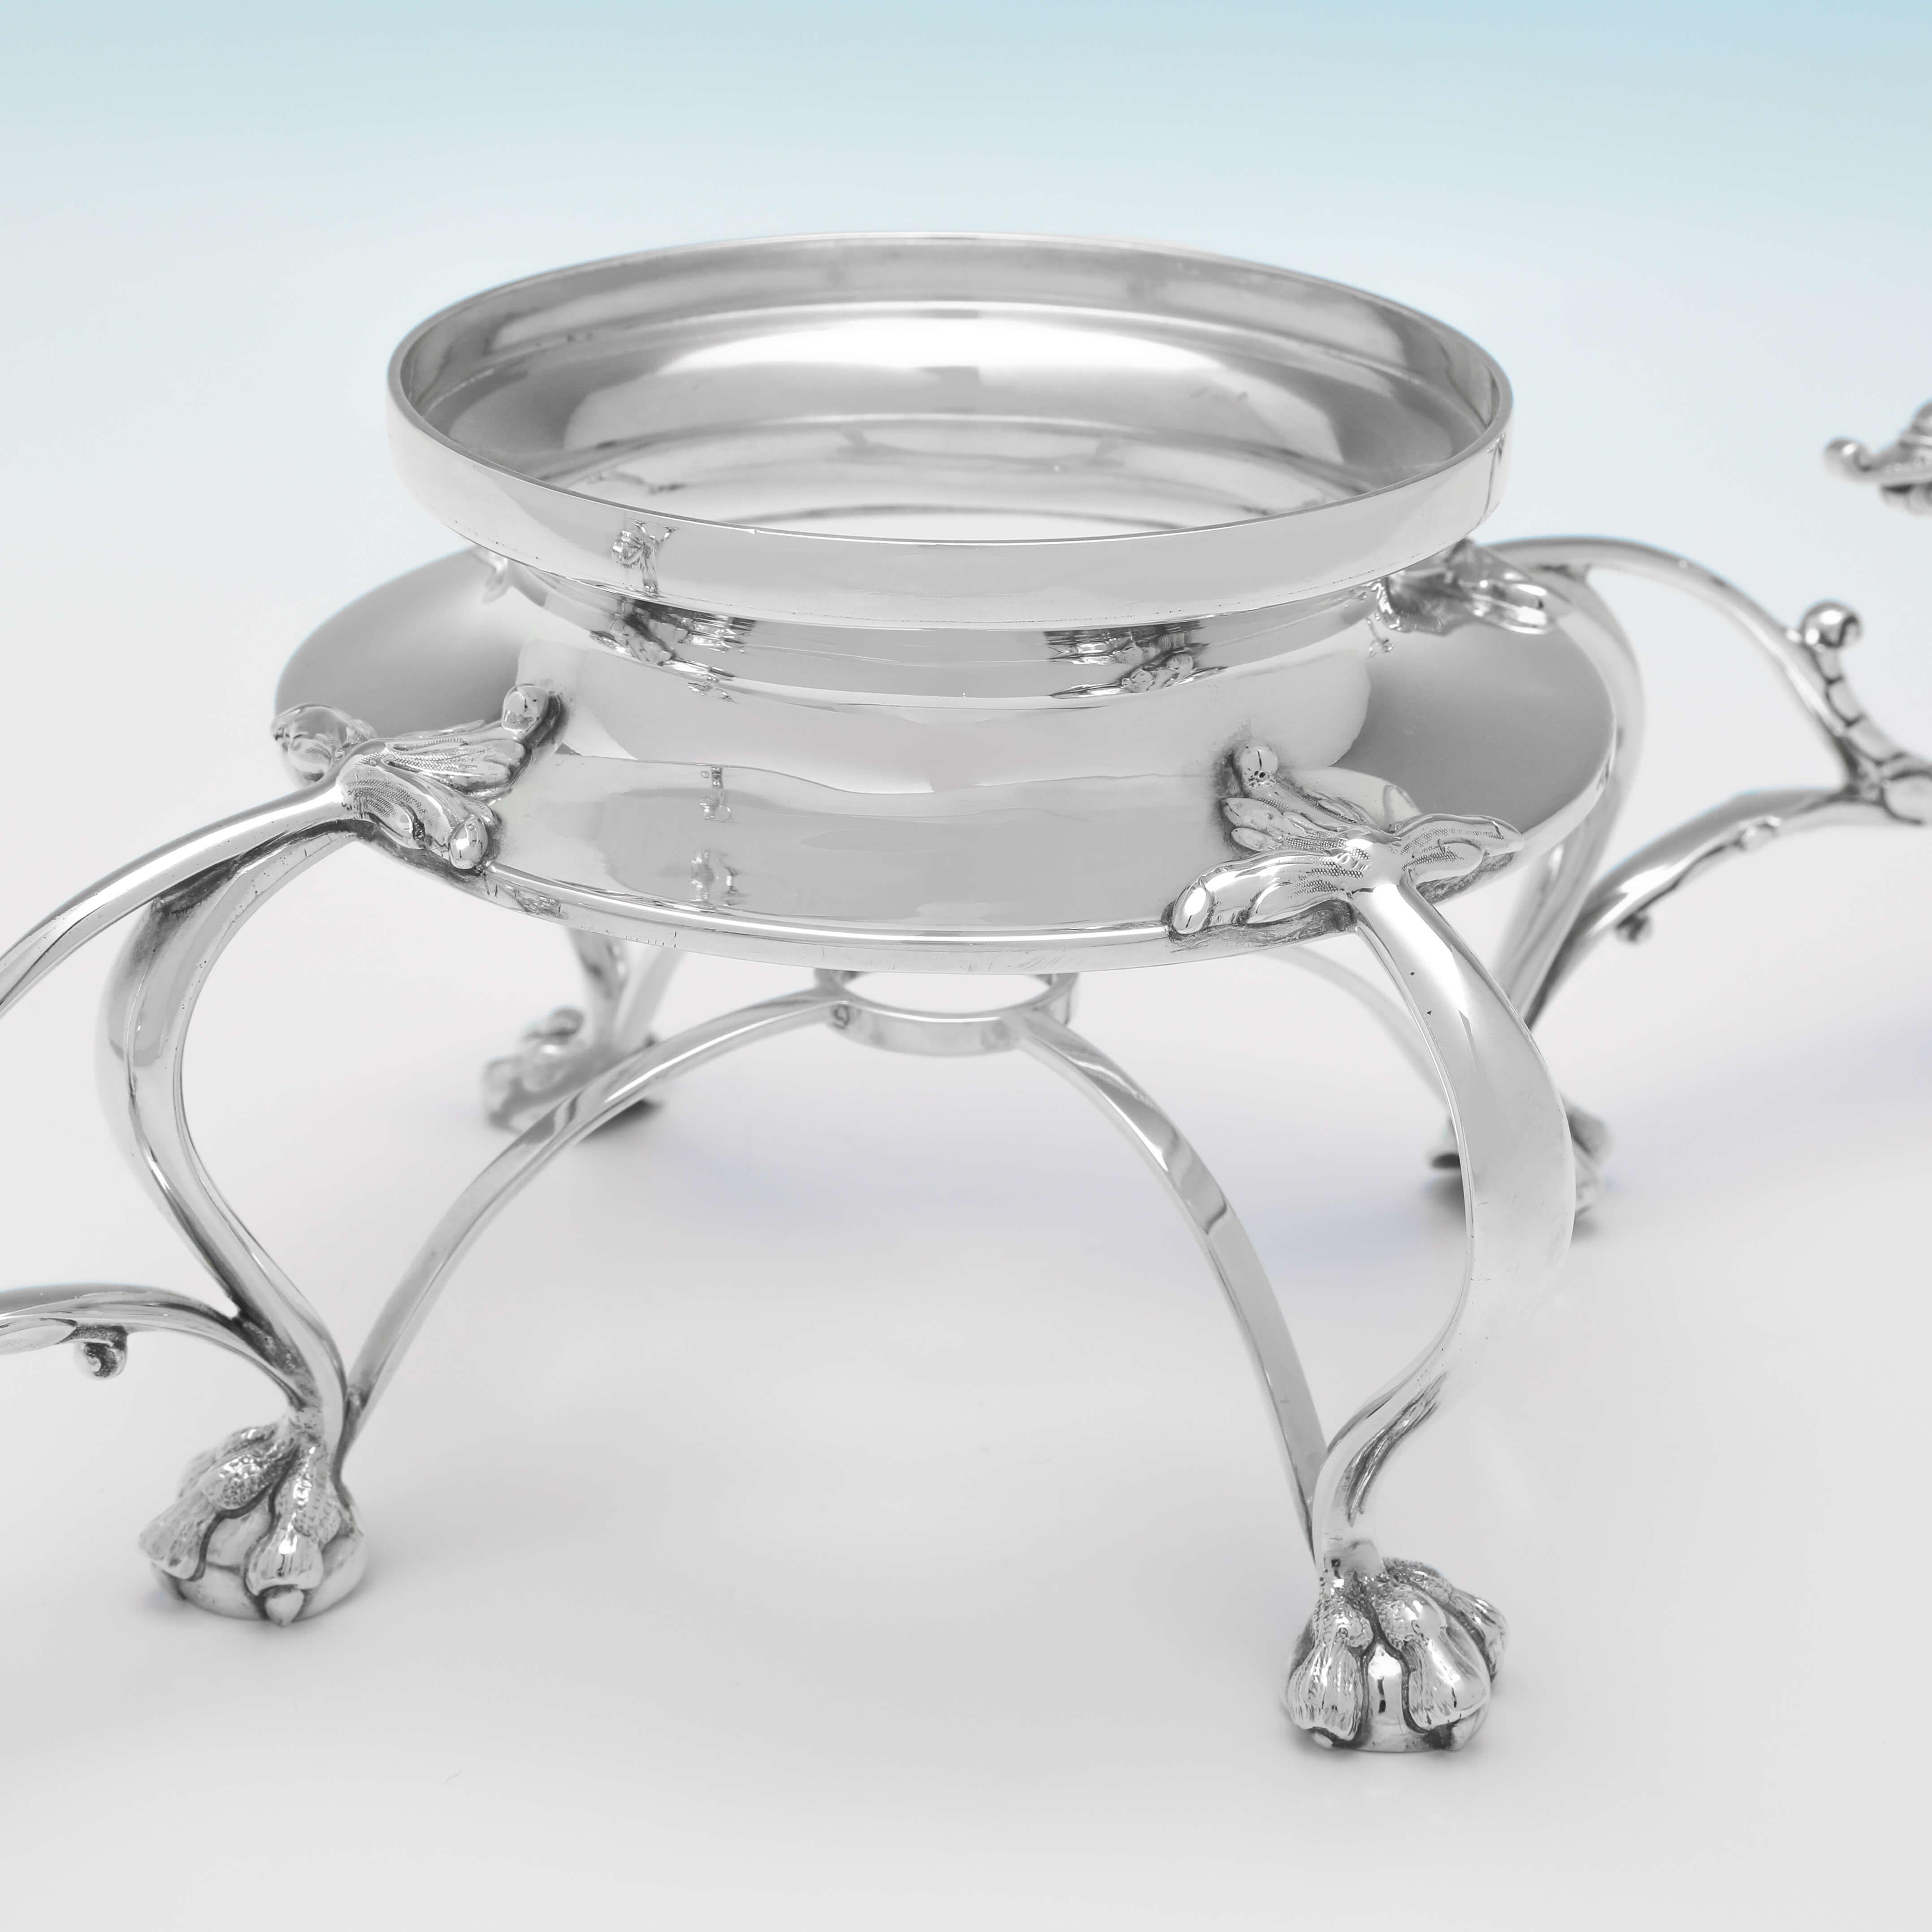 Antique Sterling Silver Centrepiece with 3 Glass Bowls, London, 1913 1